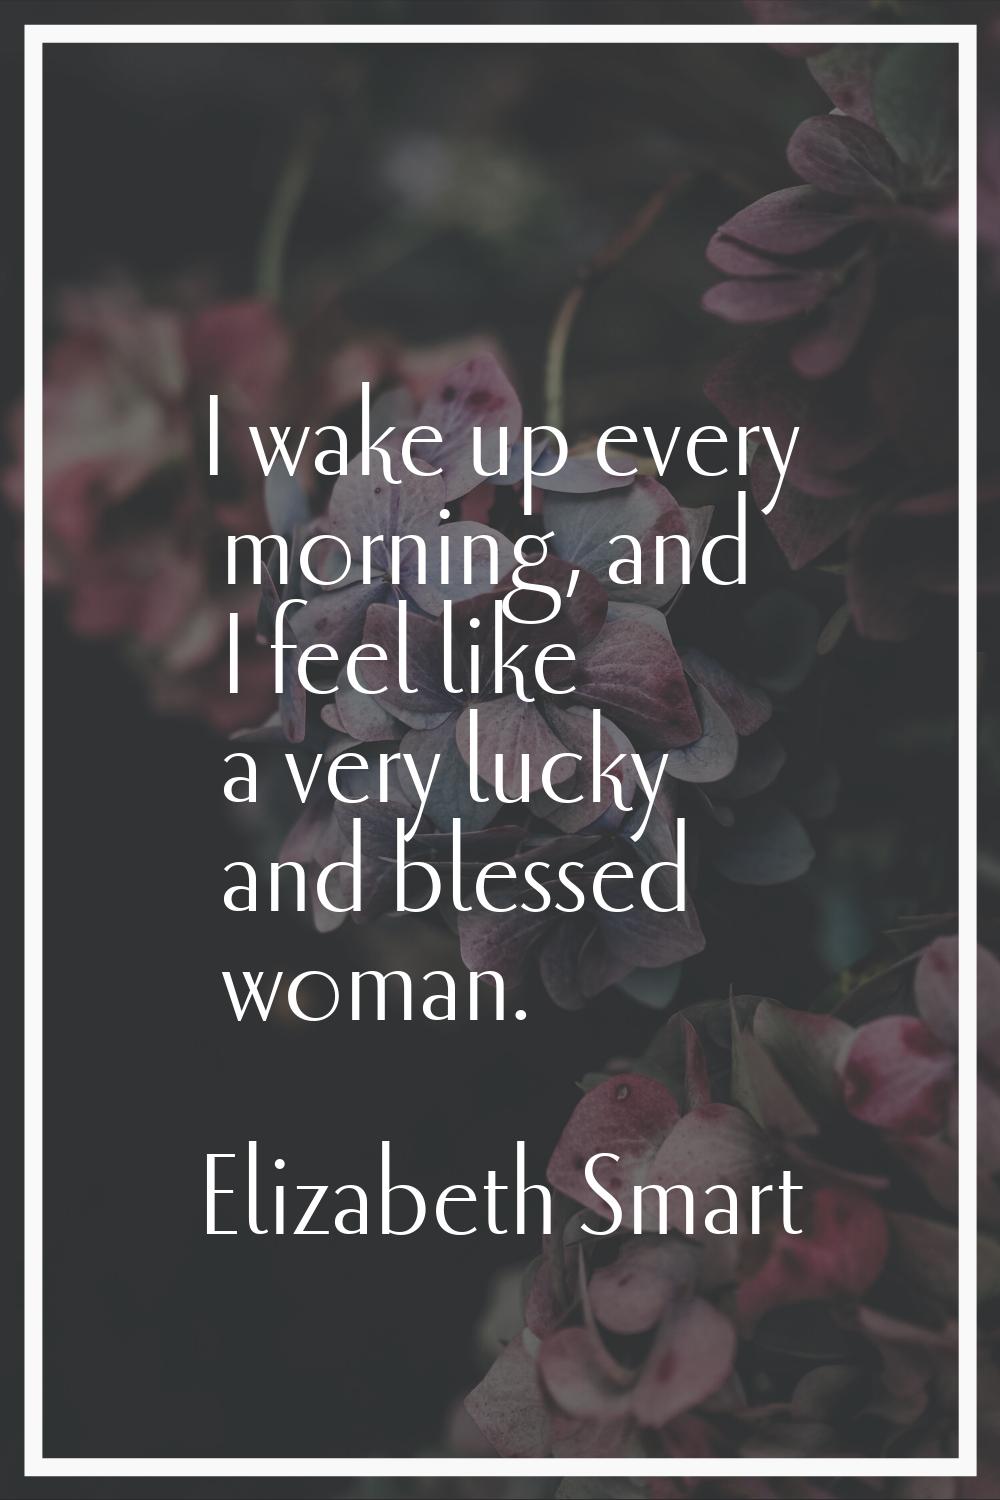 I wake up every morning, and I feel like a very lucky and blessed woman.